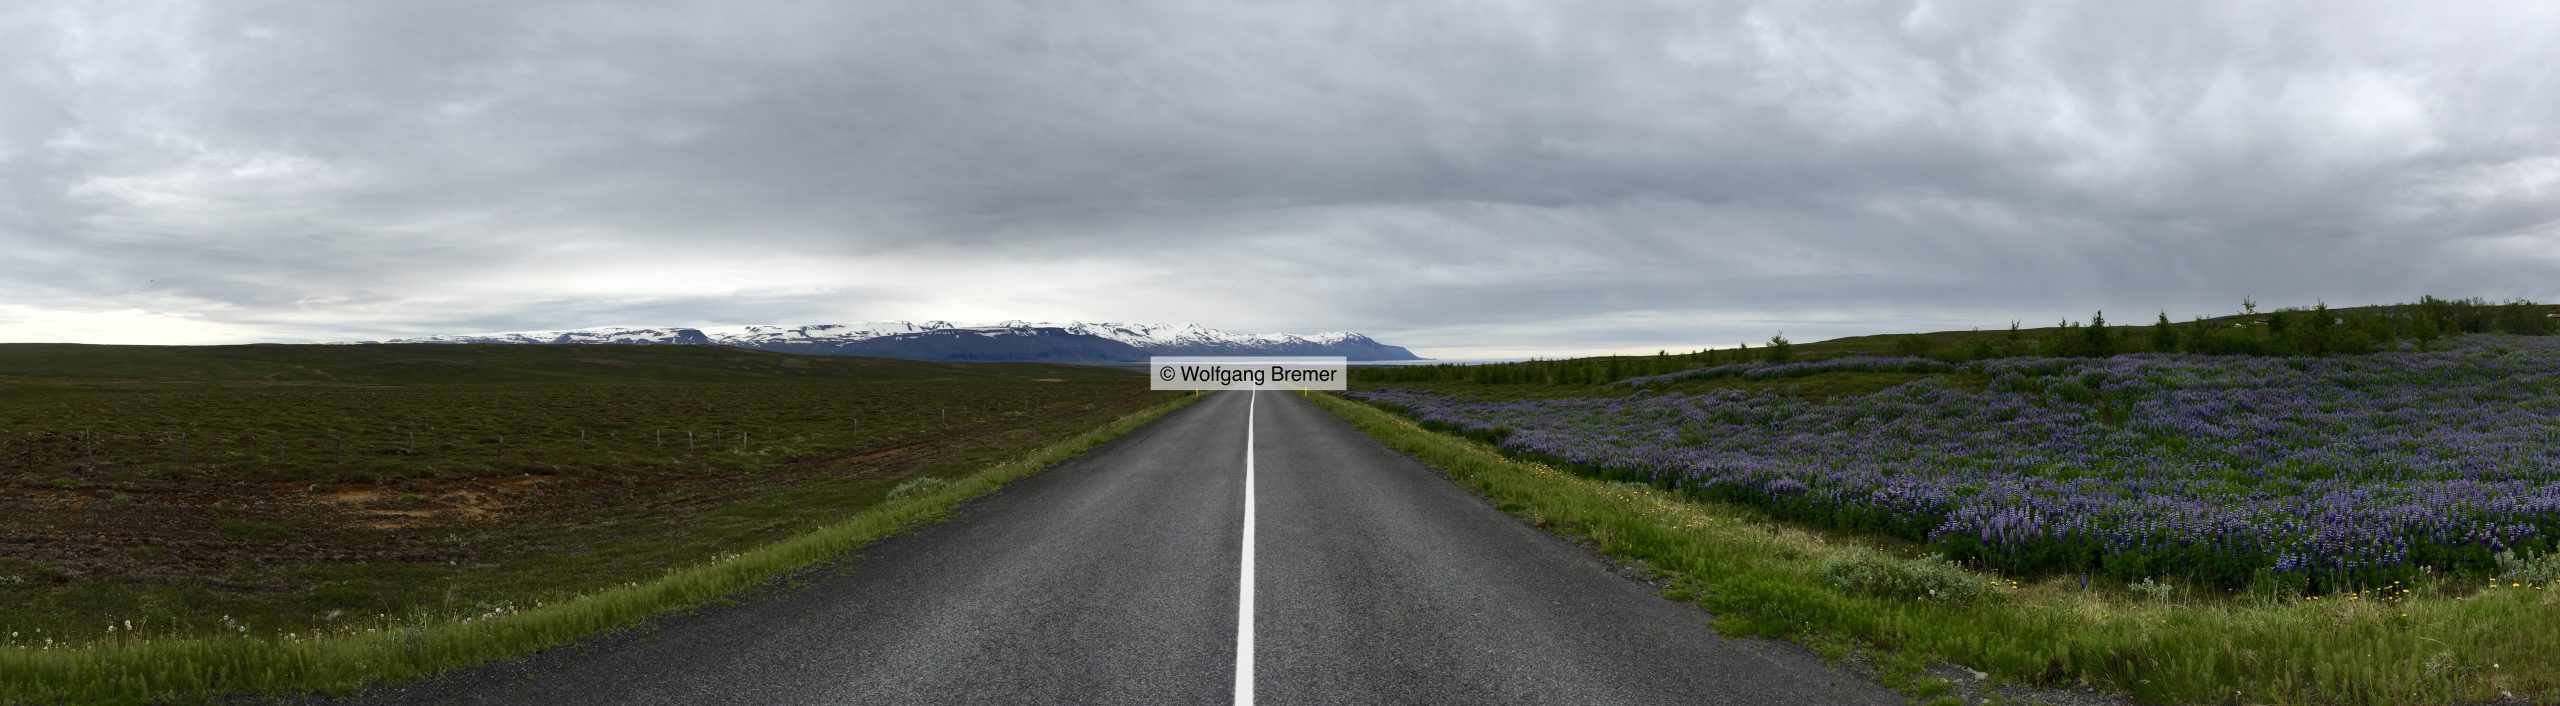 Long straight road under a cloudy sky in Iceland by Wolfgang Bremer